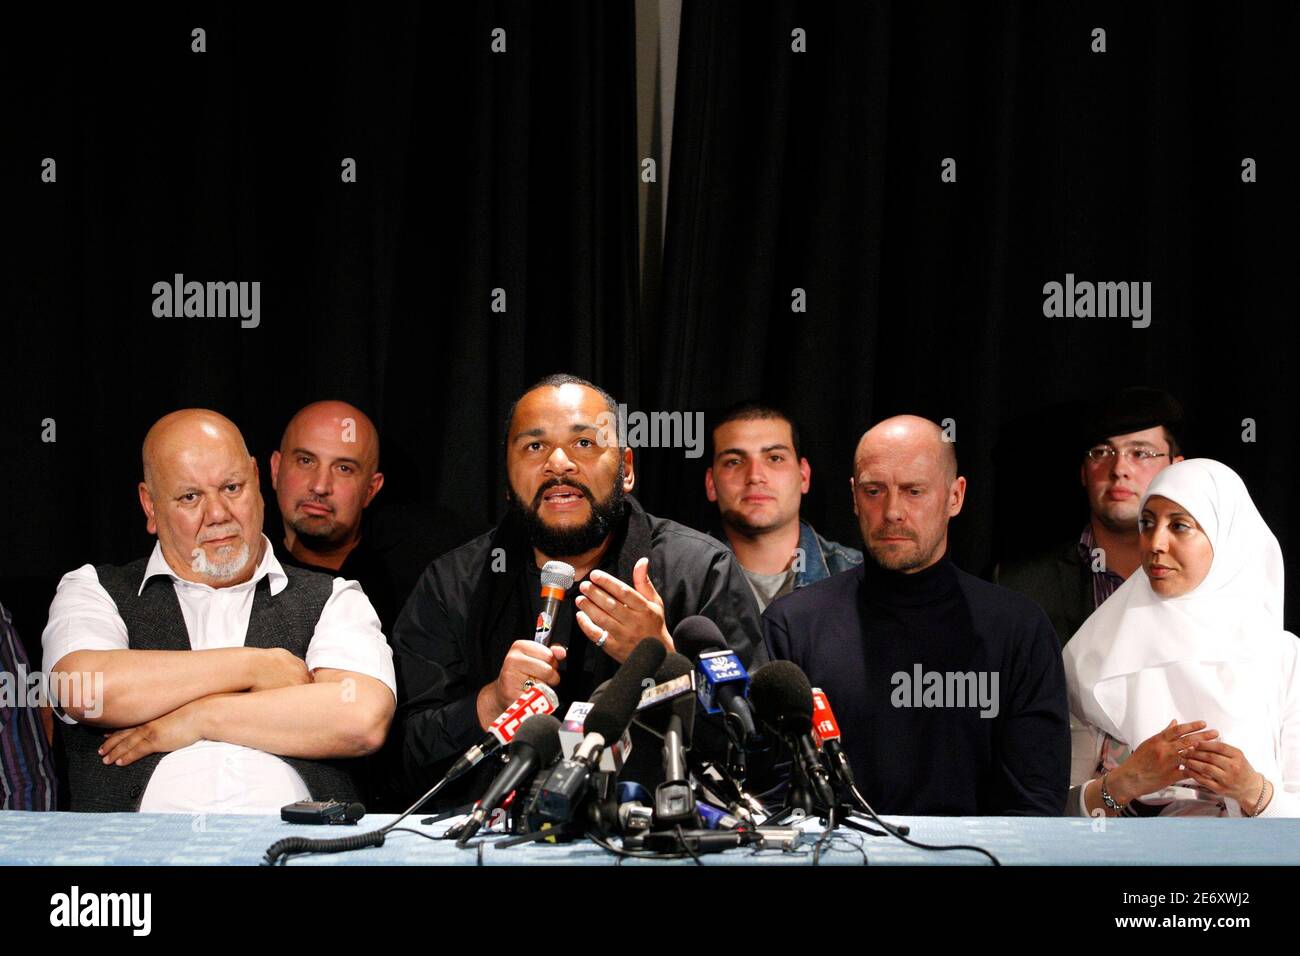 French humorist Dieudonne M'bala M'bala, also known as Dieudonne (C), along  with French writer and former France's far-right National Front political  party adviser Alain Soral (3rd R) attend a news conference in